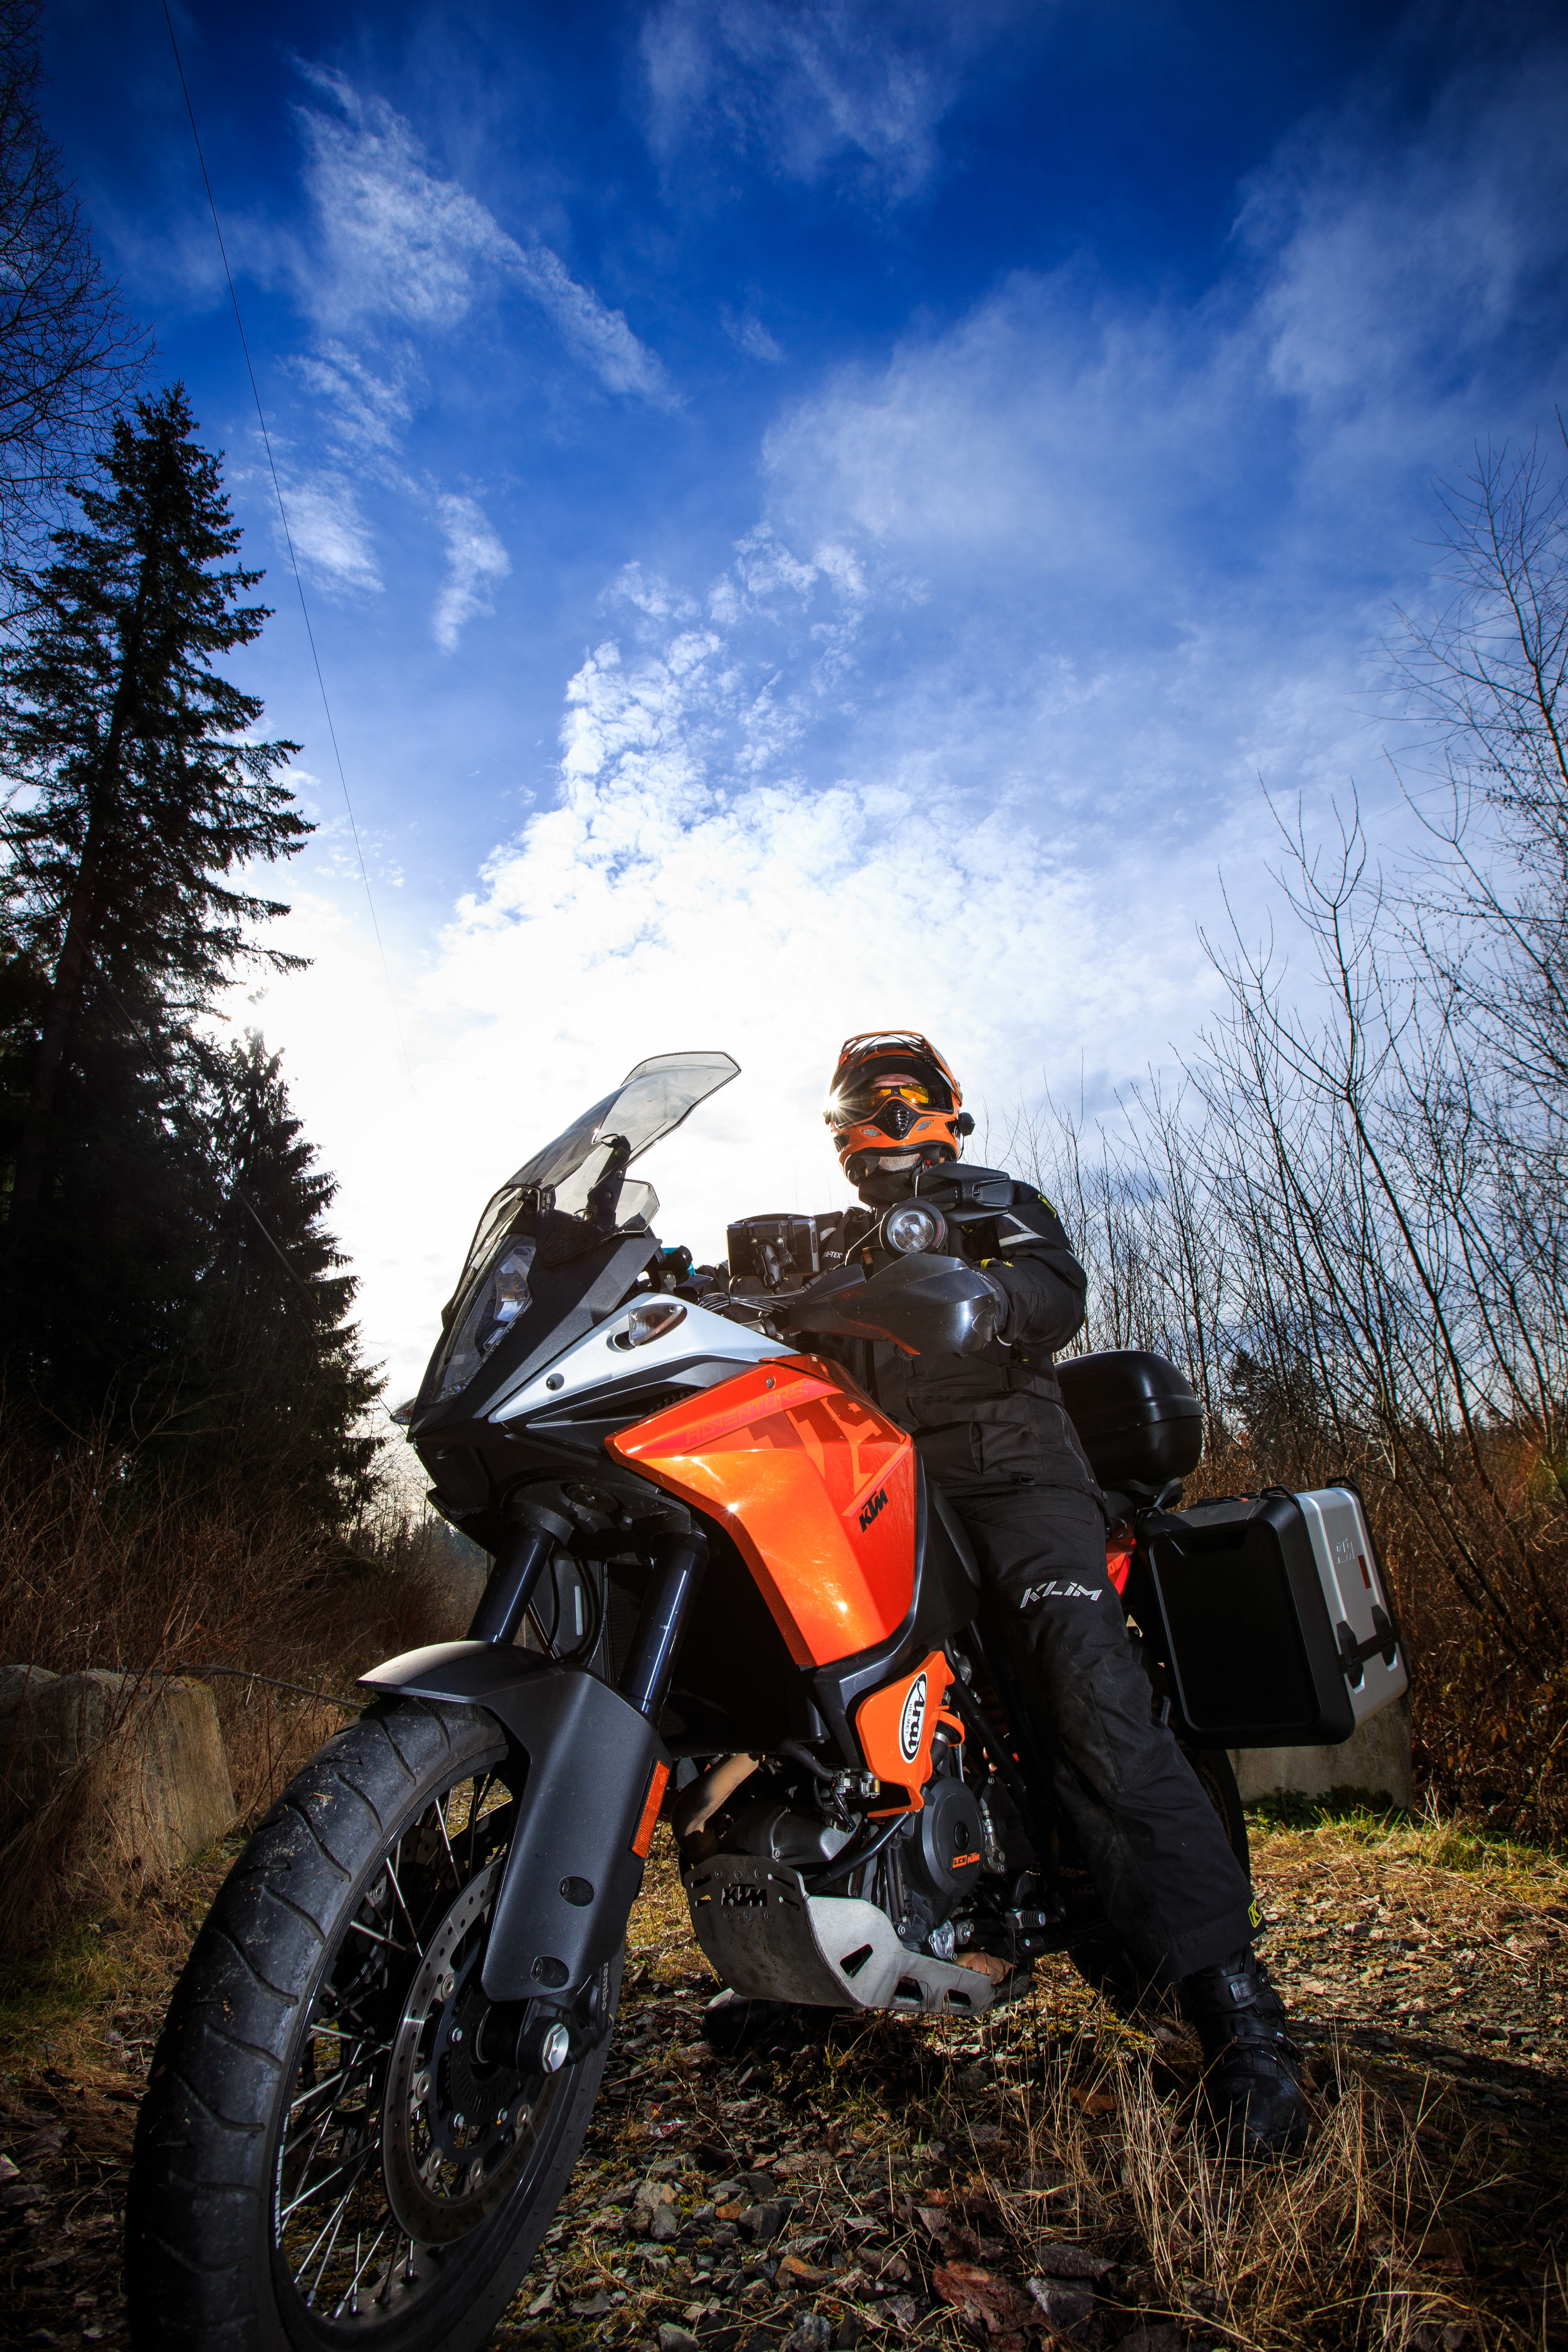 Editorial Photography with KTM Motorcycle